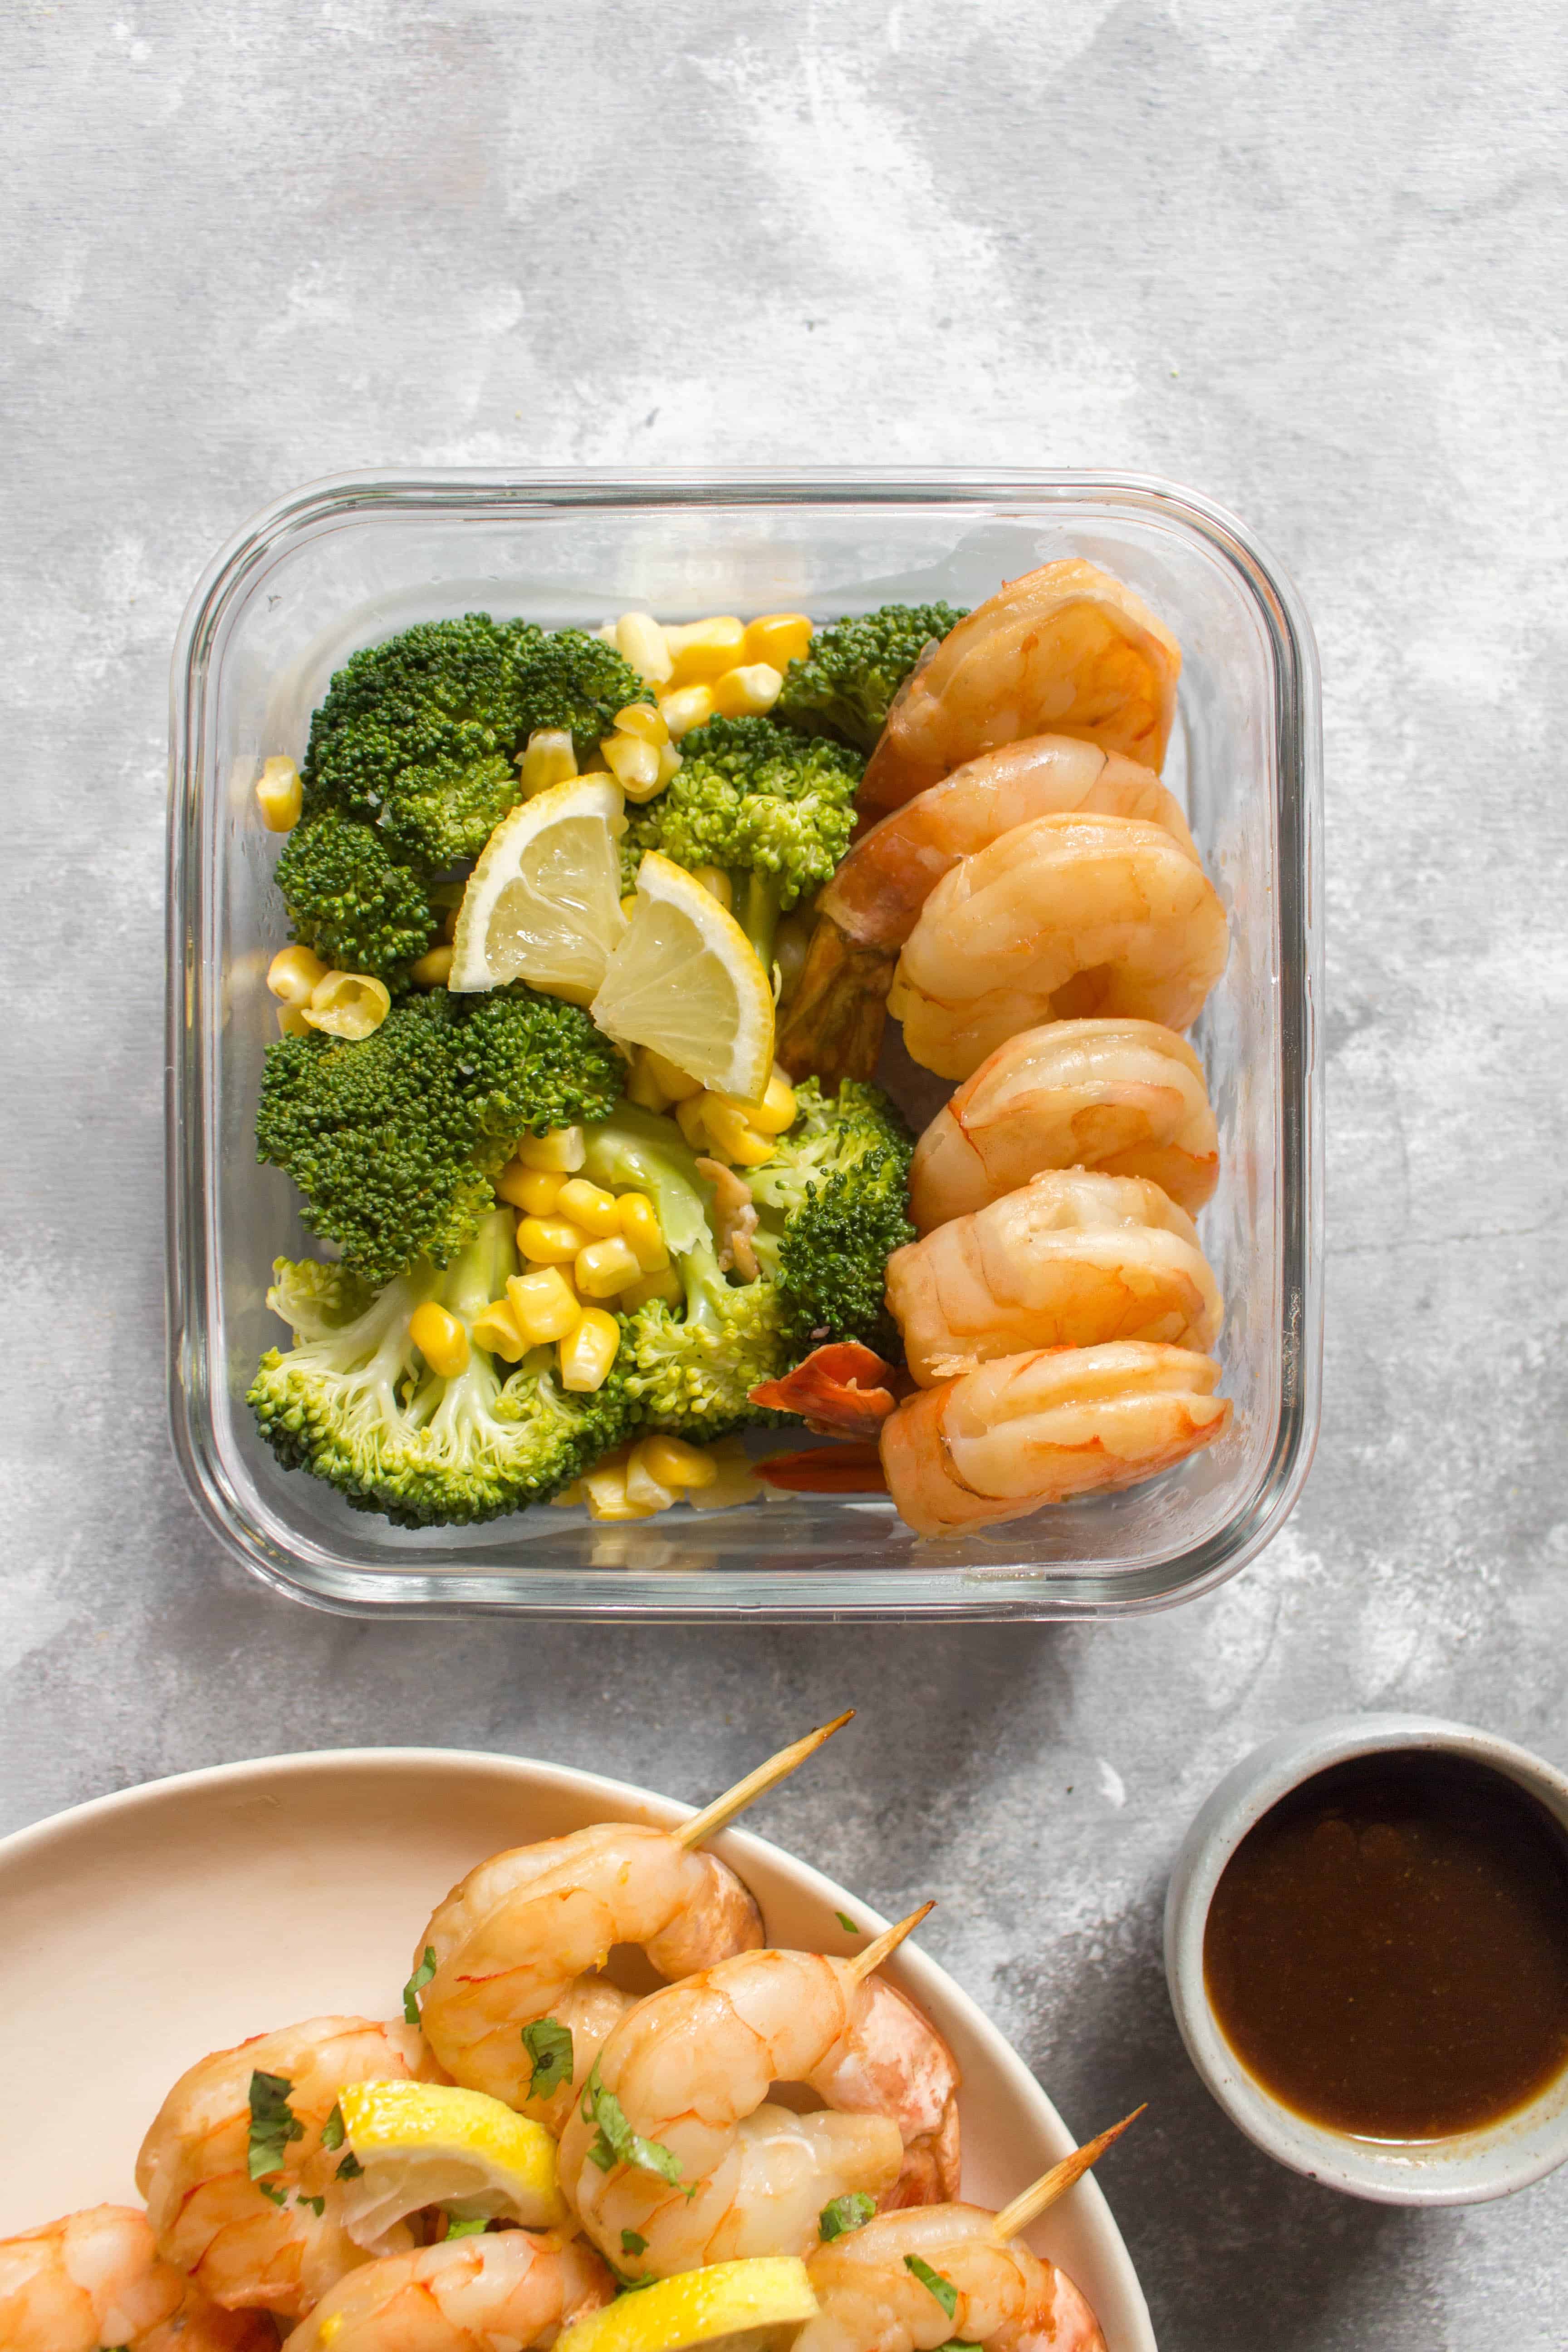 Cooked in under 10 minutes, this easy sweet hoisin lemon shrimp meal prep is packed with flavour. Marinate the shrimp overnight or for 30 minutes, and you've got yourself a delicious meal prep! Look no further for this week's meal prep than this sweet hoisin lemon shrimp recipe!